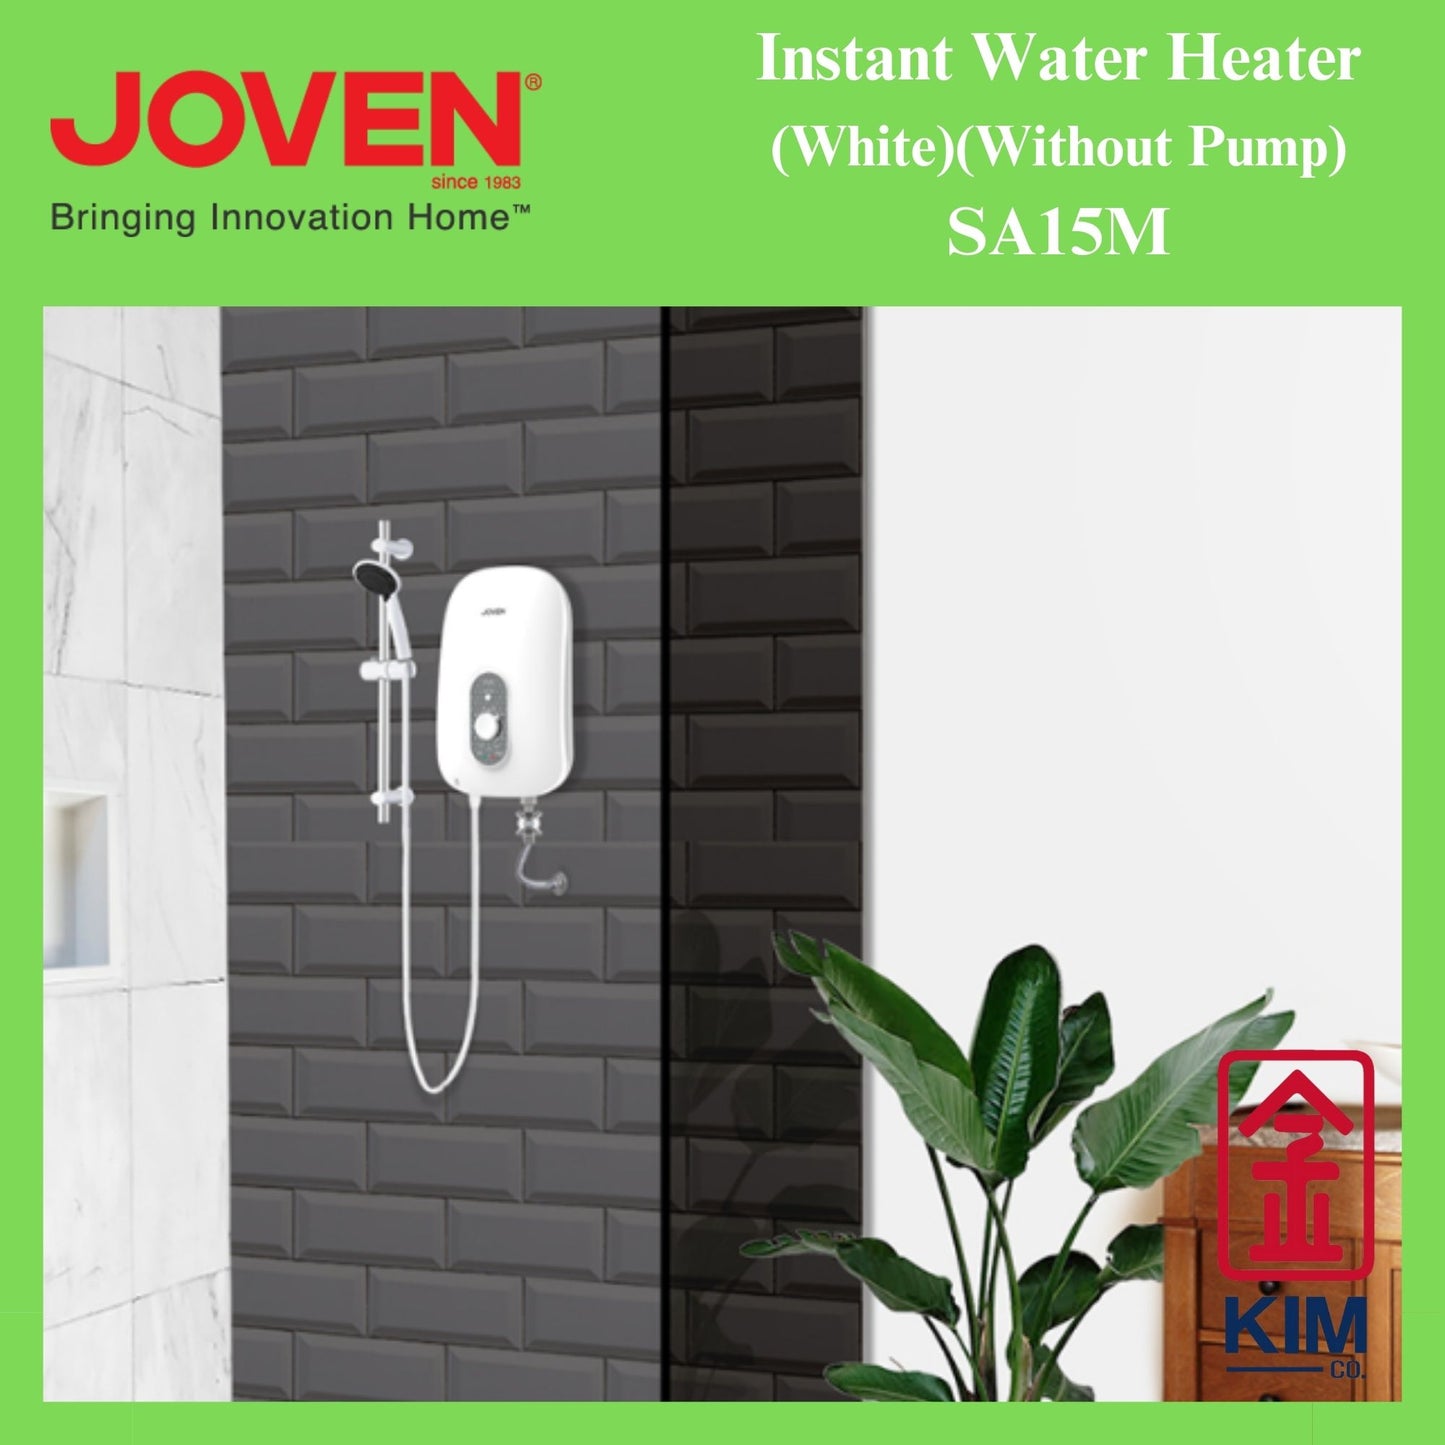 Joven Instant Water Heater Without Pump (SA15M) (White)